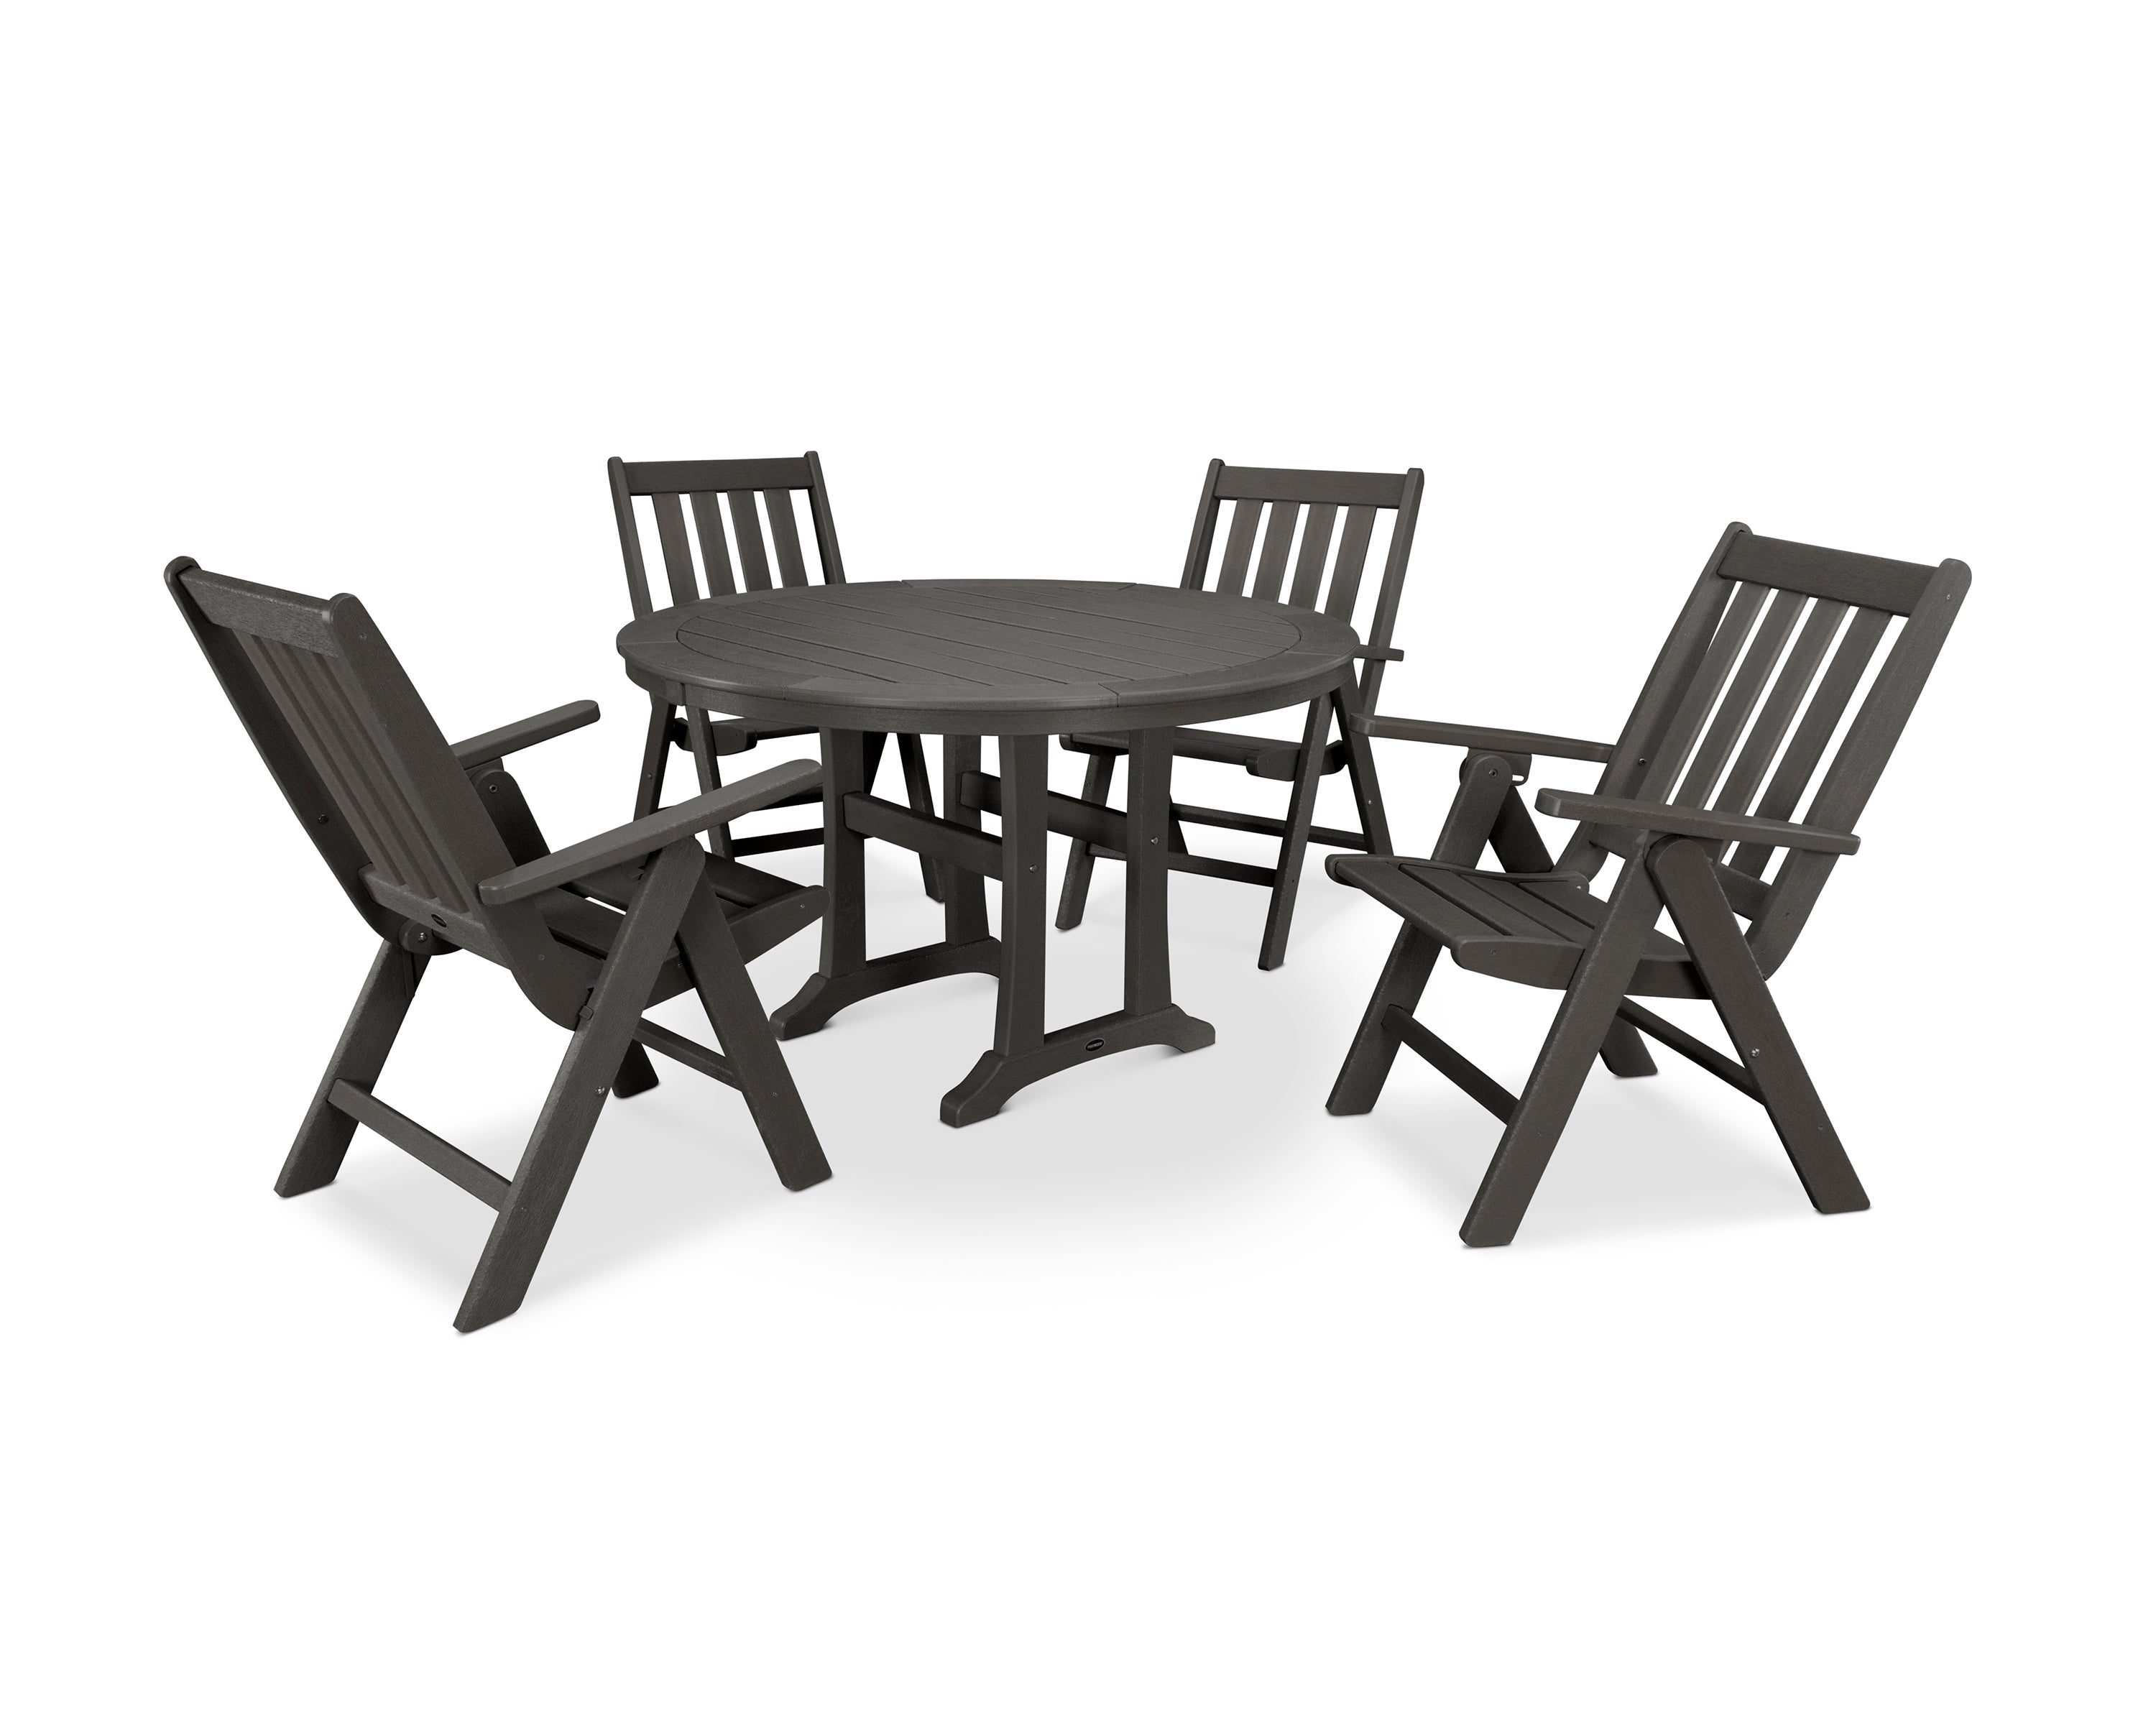 POLYWOOD® Vineyard Folding Chair 5-Piece Round Dining Set with Trestle Legs in Vintage Coffee